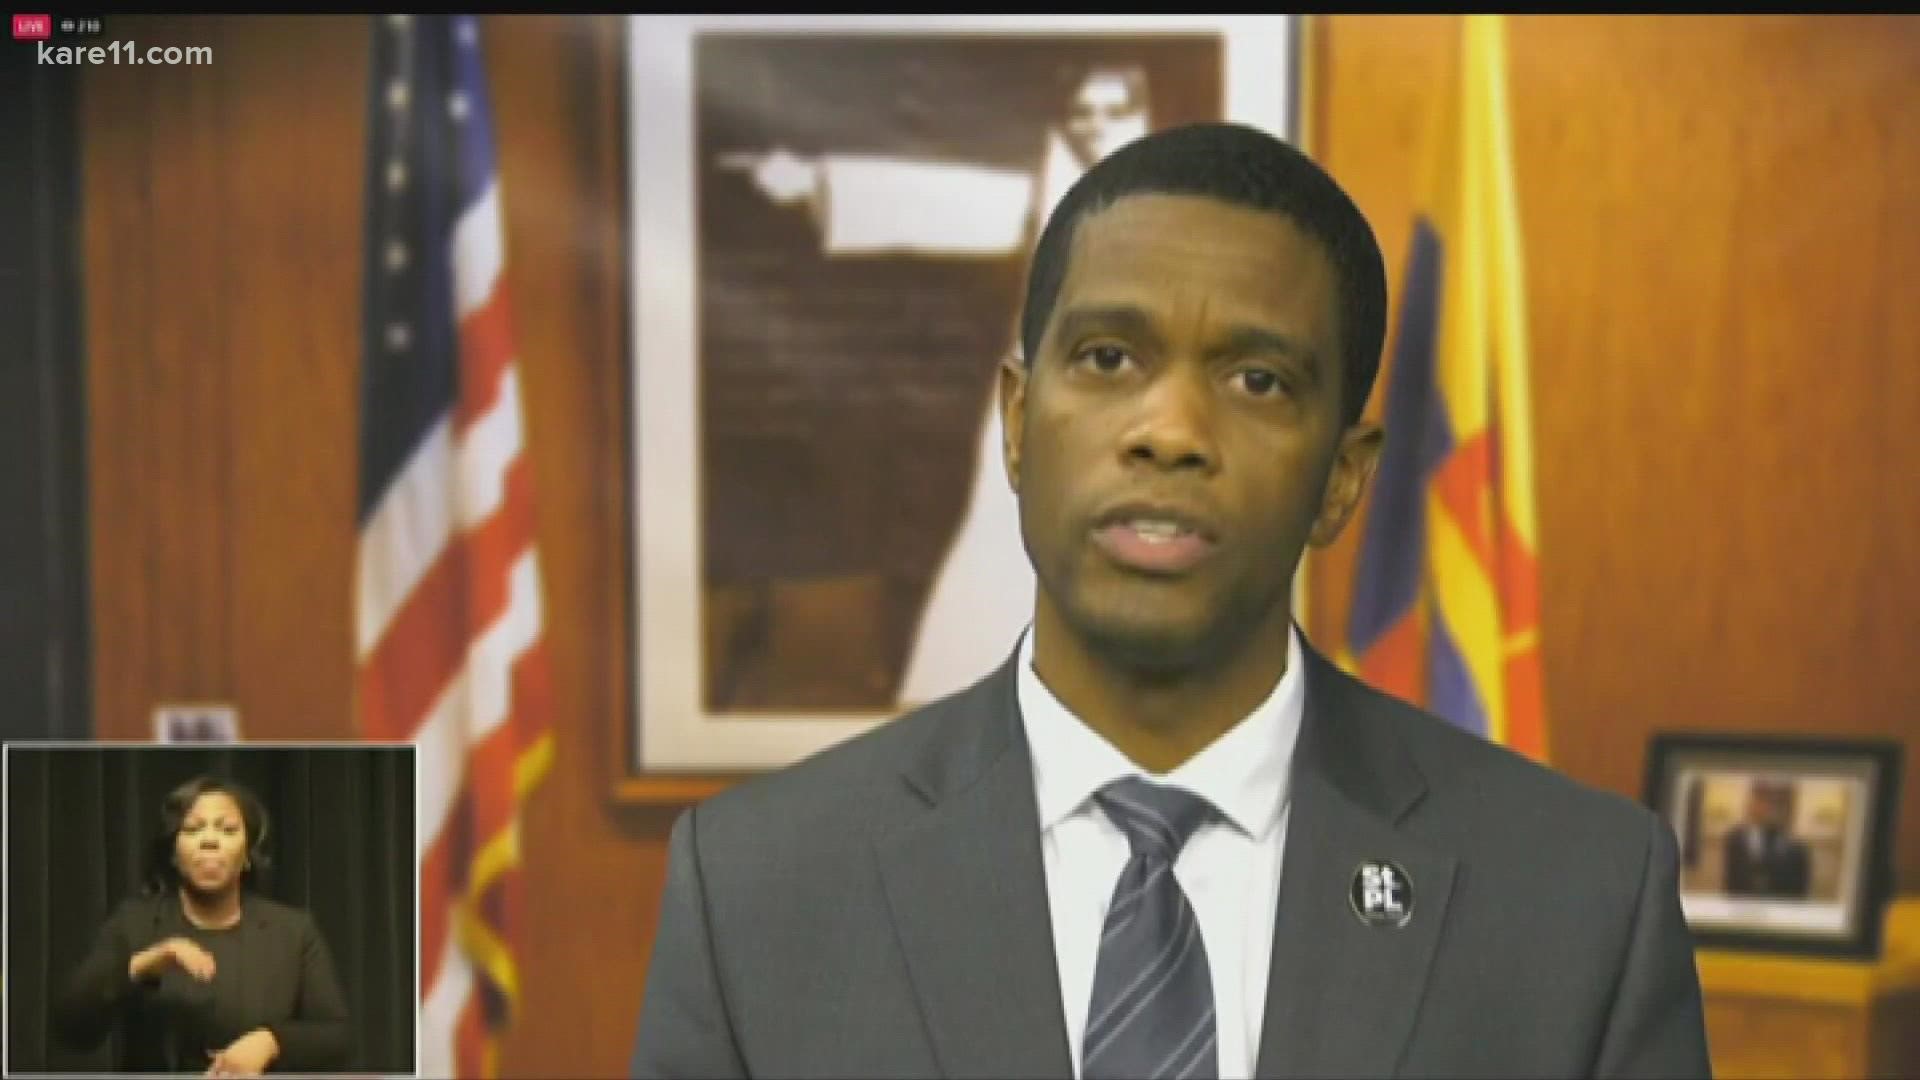 Mayor Melvin Carter discussed some of the recent violence in St. Paul, as well as the city's COVID-19 policies during his State of the City address.